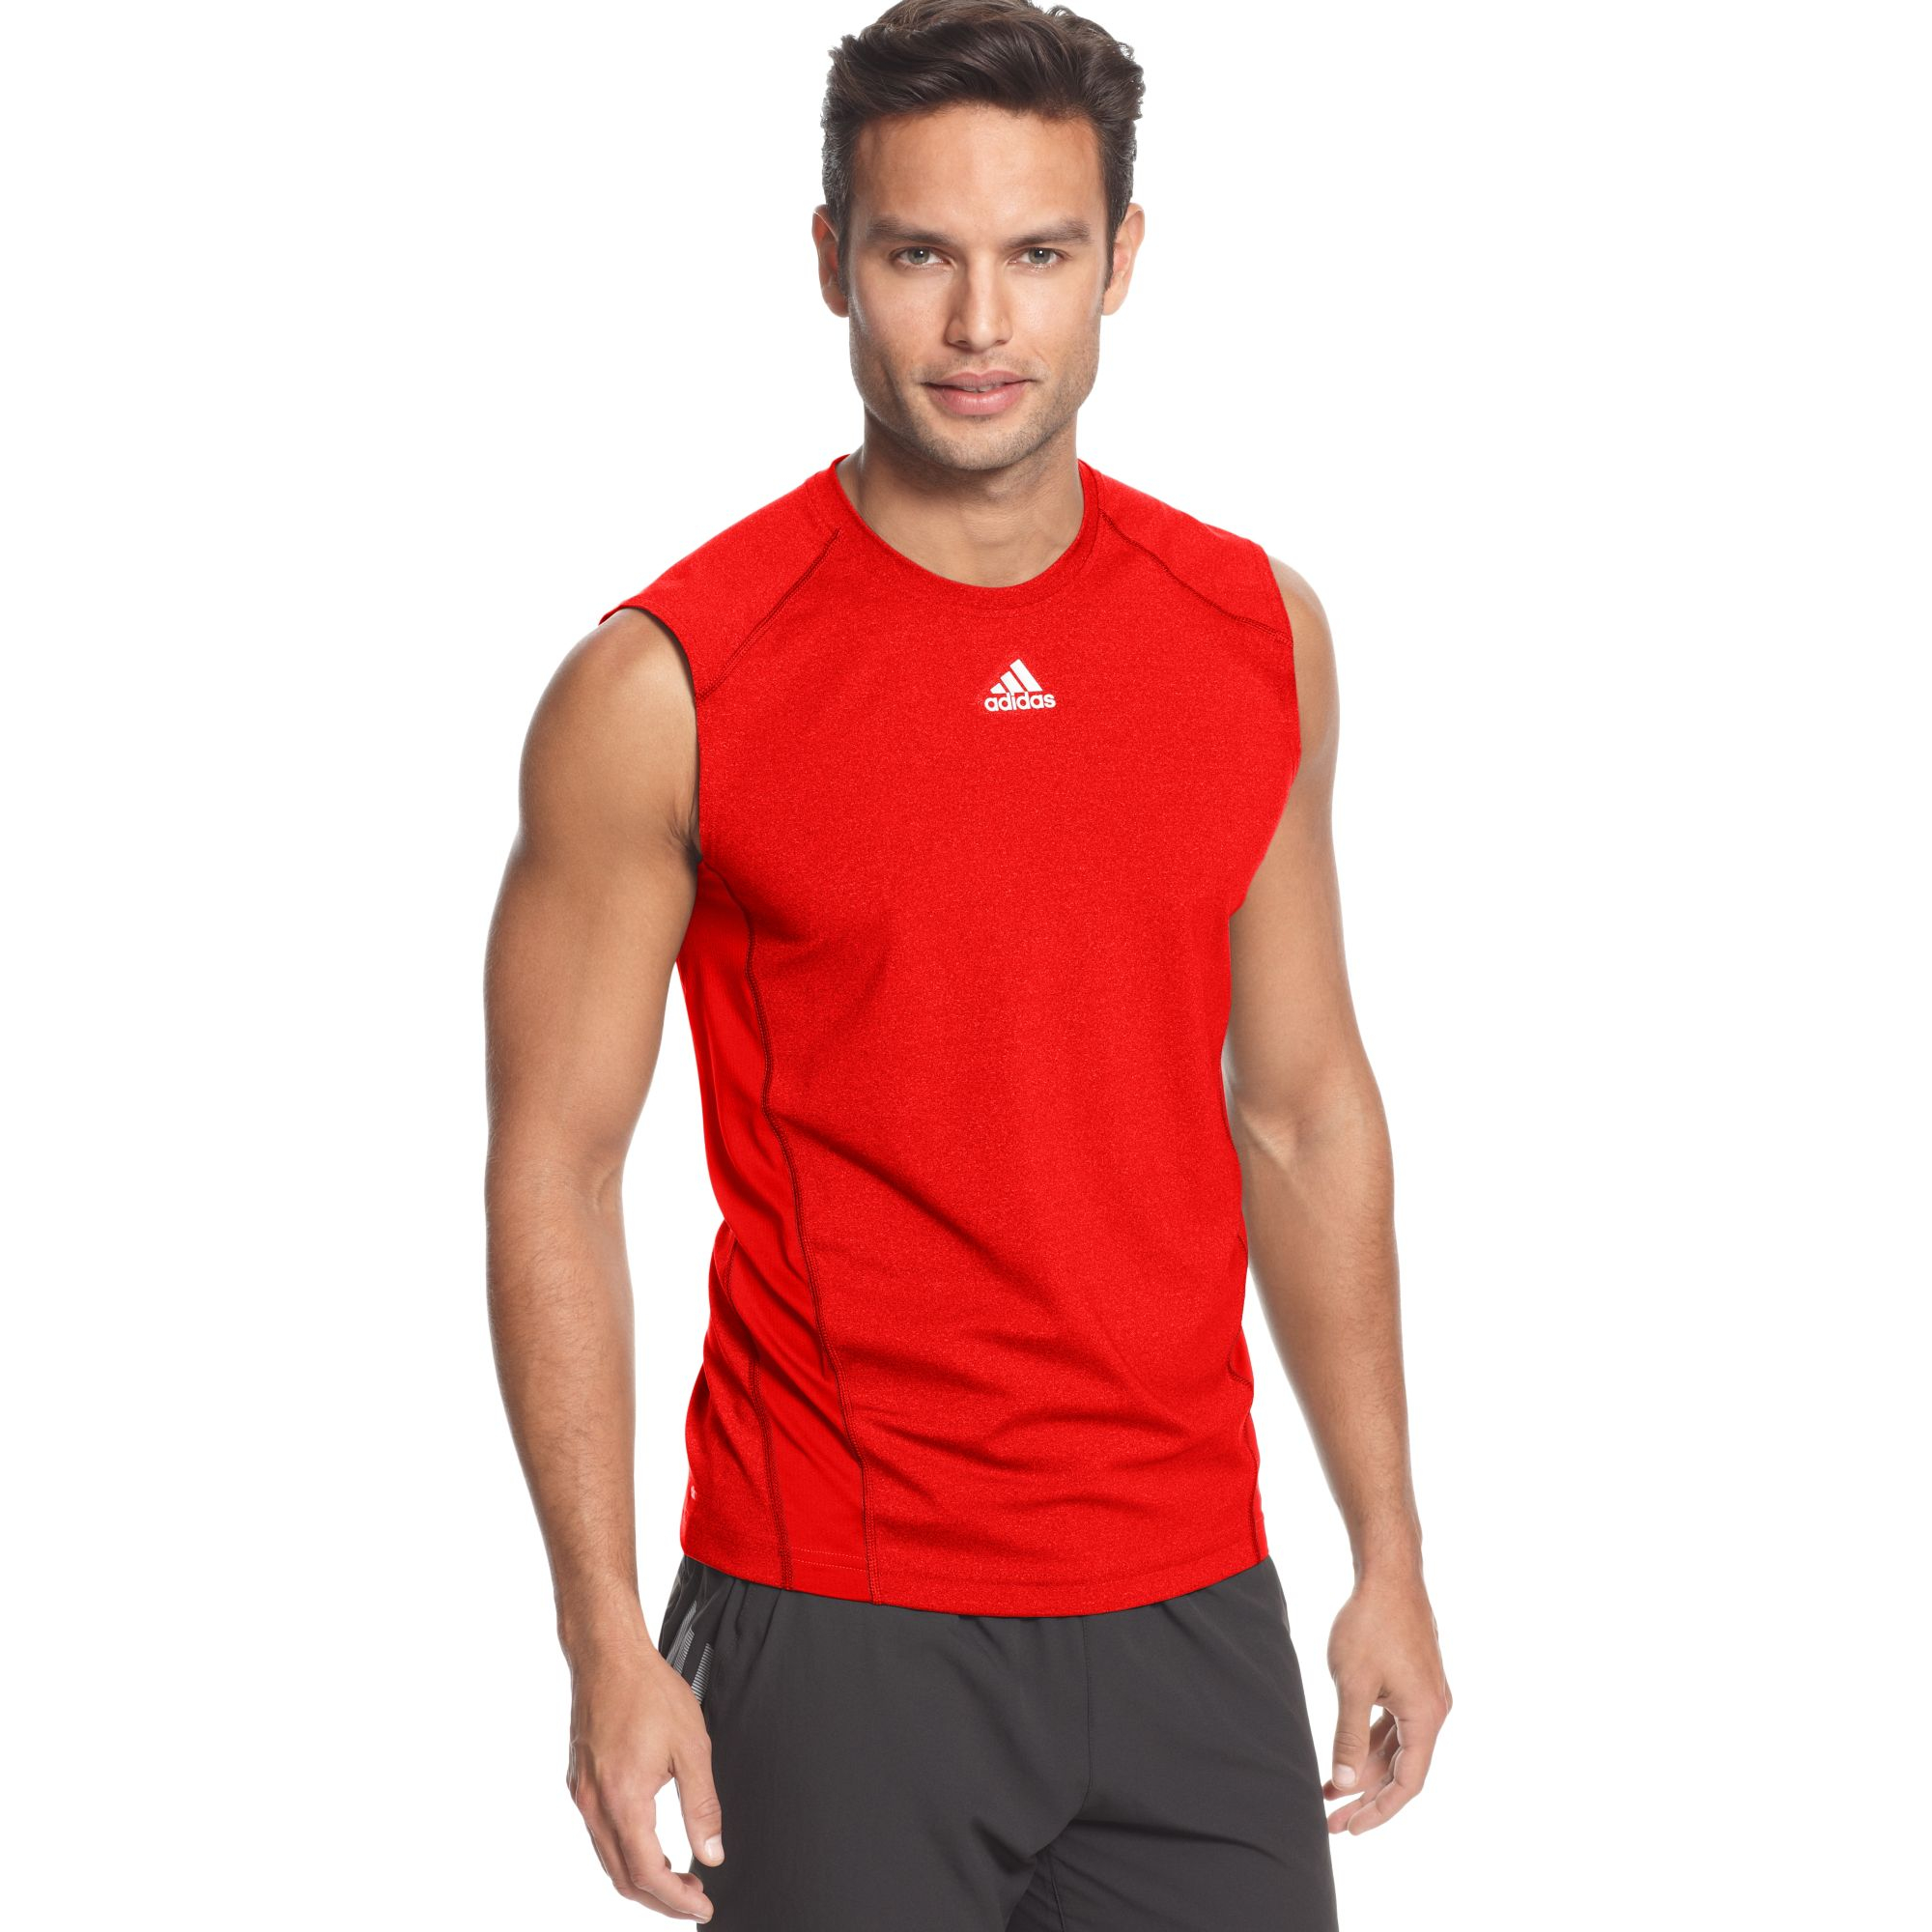 Lyst Adidas  Sleeveless T  Shirt  in Red for Men 